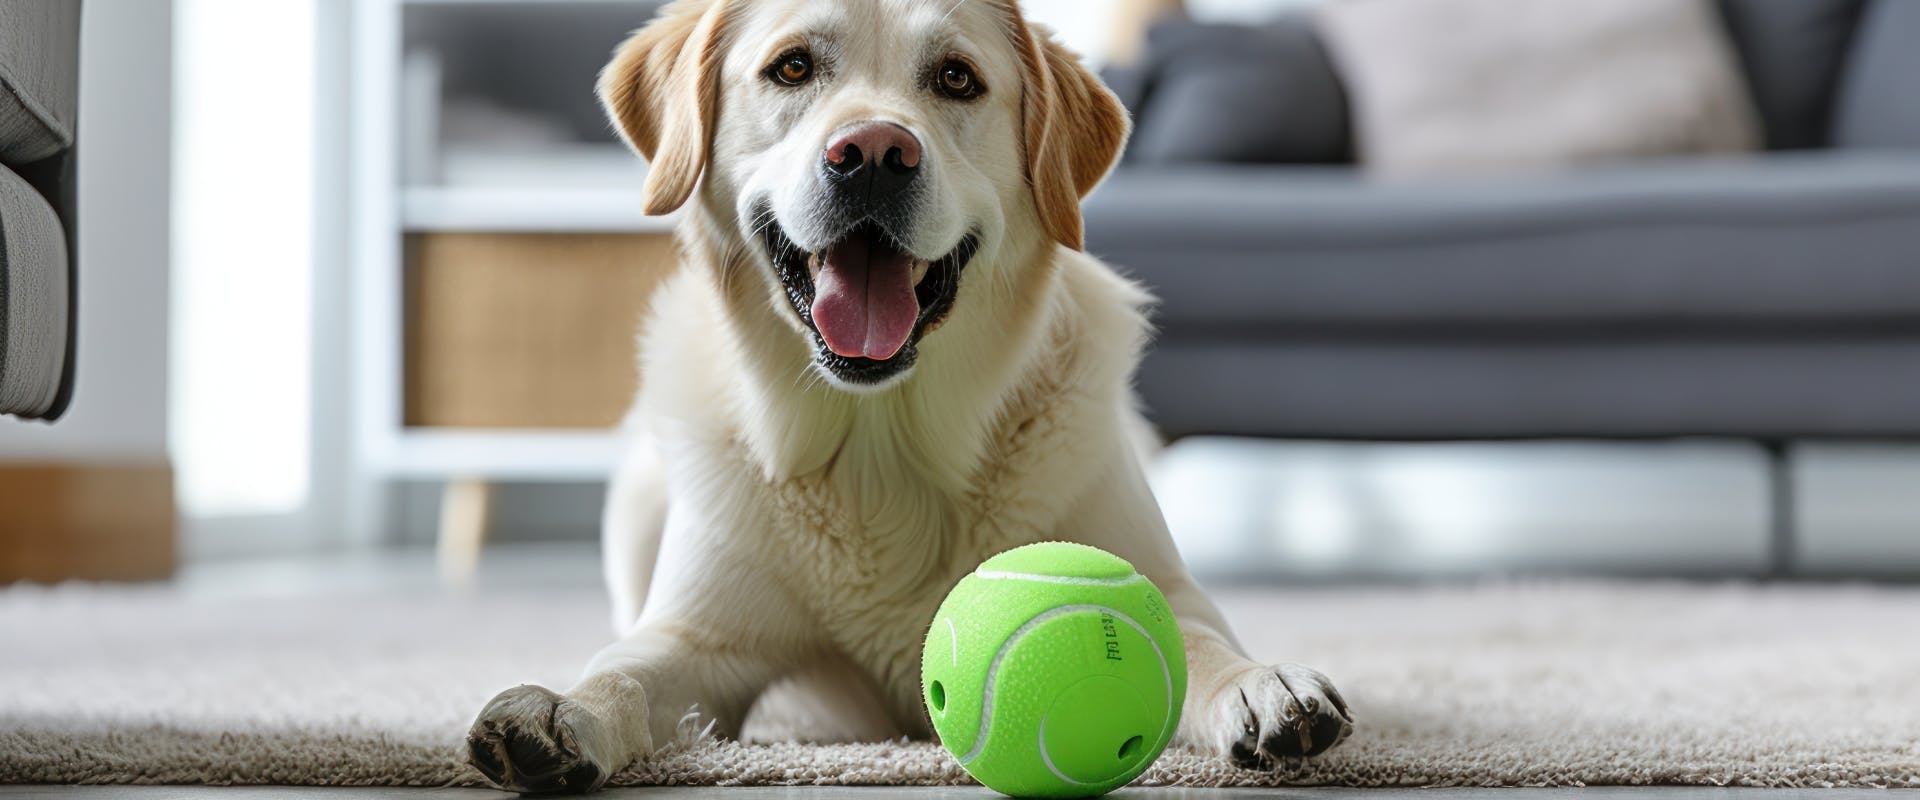 https://images.prismic.io/trustedhousesitters/6e2b684a-7eec-4ecf-9705-d8c9a1e494d5_puzzle+dog+toy.png?auto=compress,format&rect=0,0,1920,800&w=1920&h=800